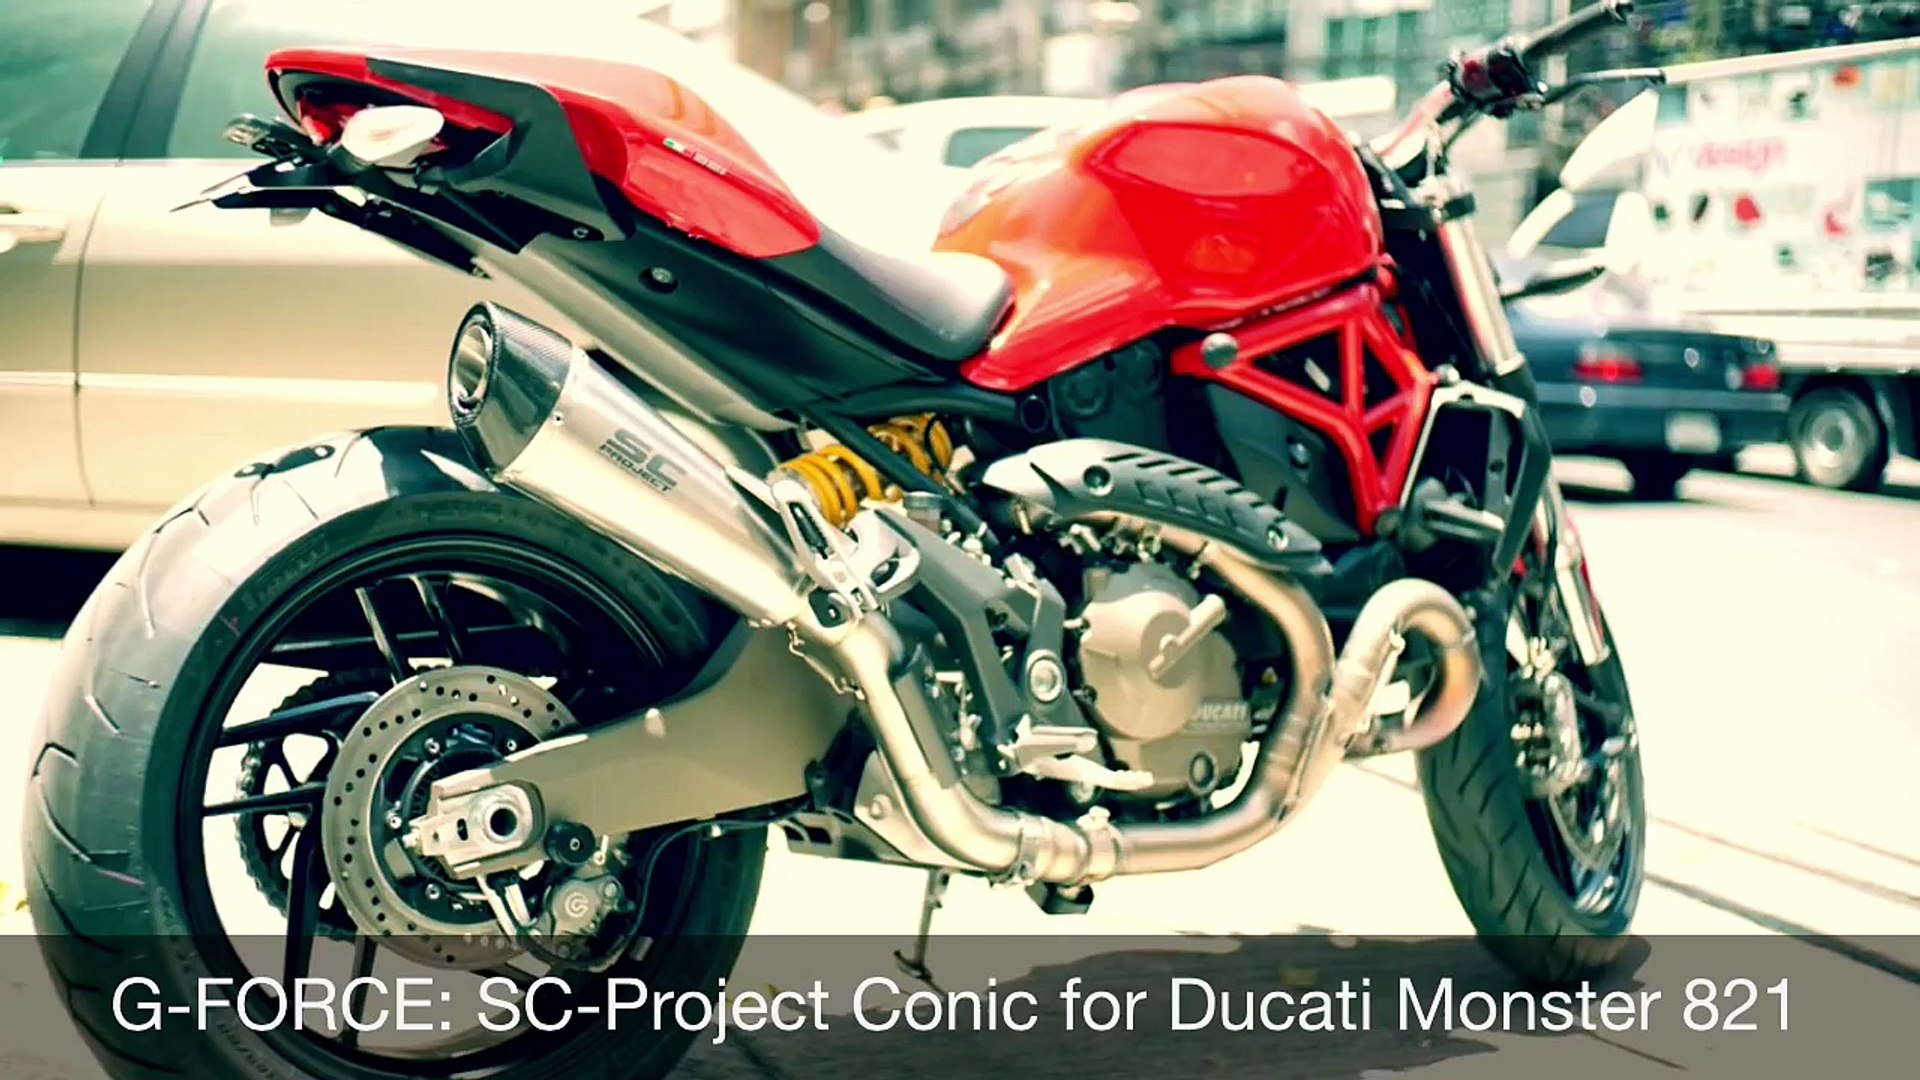 SC-Project Conic for Ducati Monster 821 @ G-FORCE - video Dailymotion